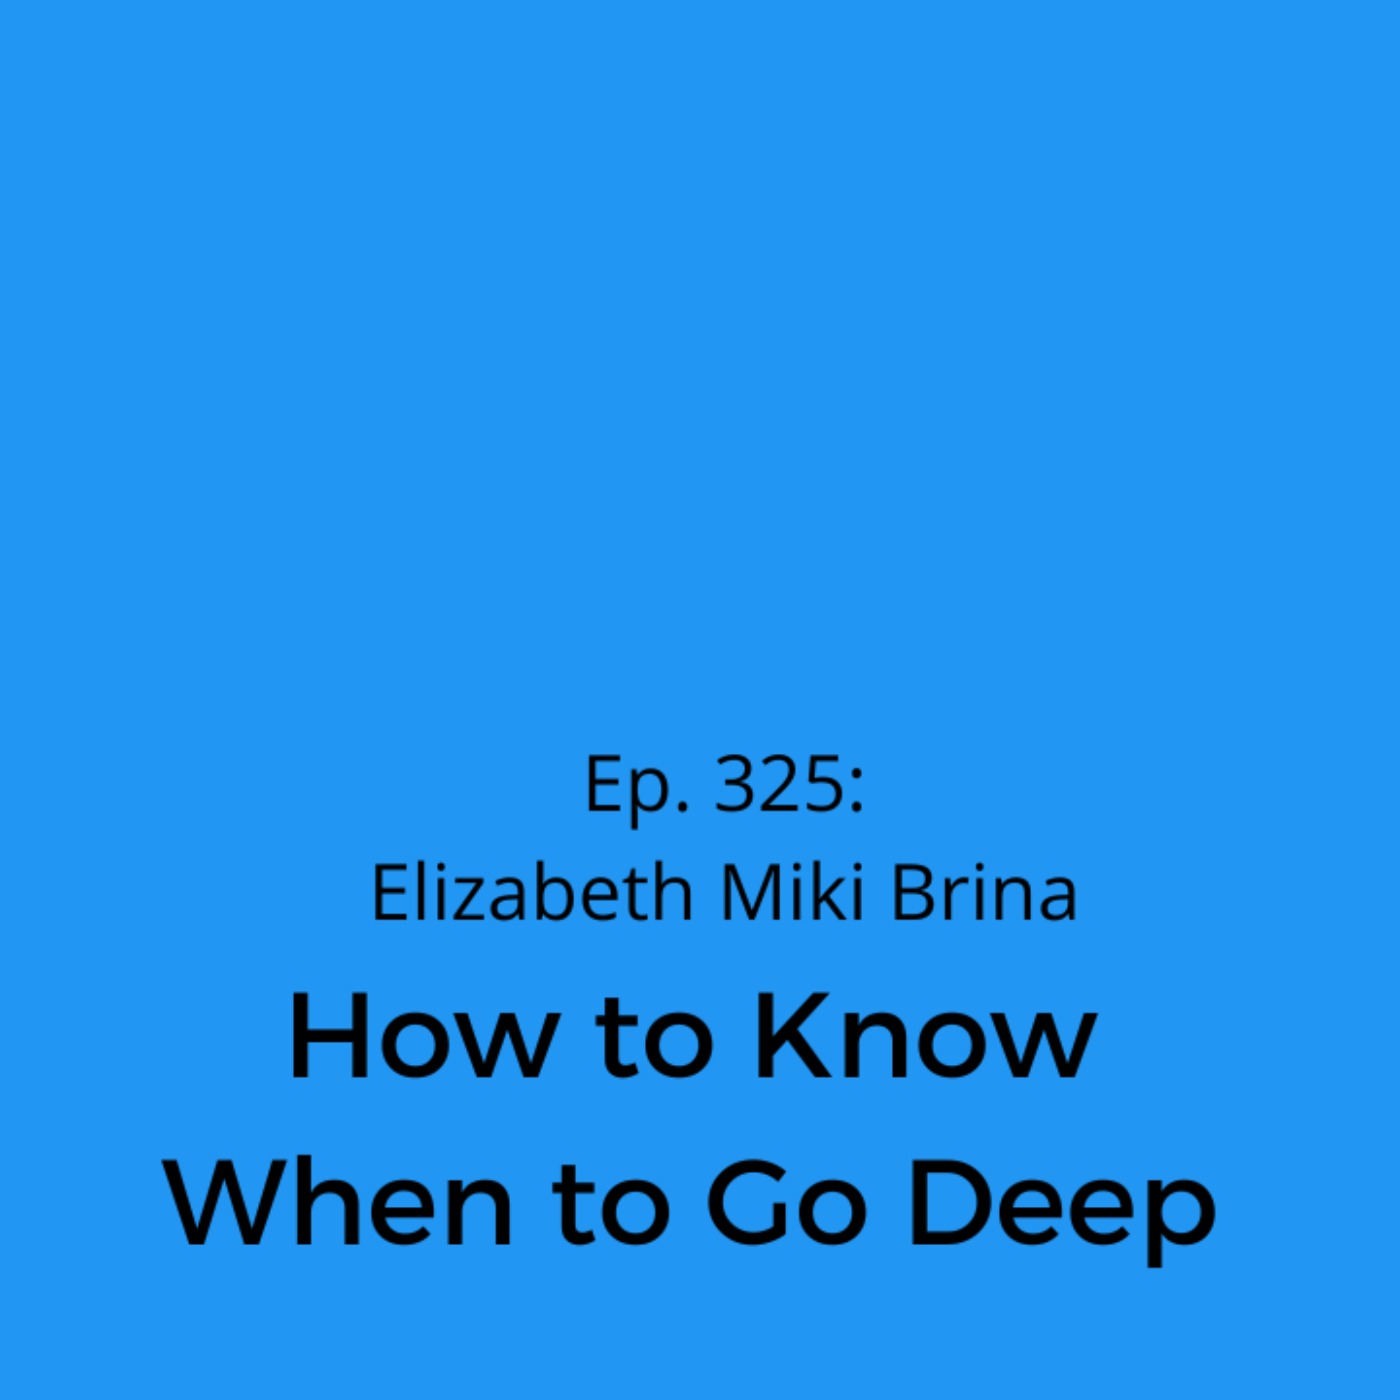 Ep. 325: Elizabeth Miki Brina on How to Know When to Go Deep